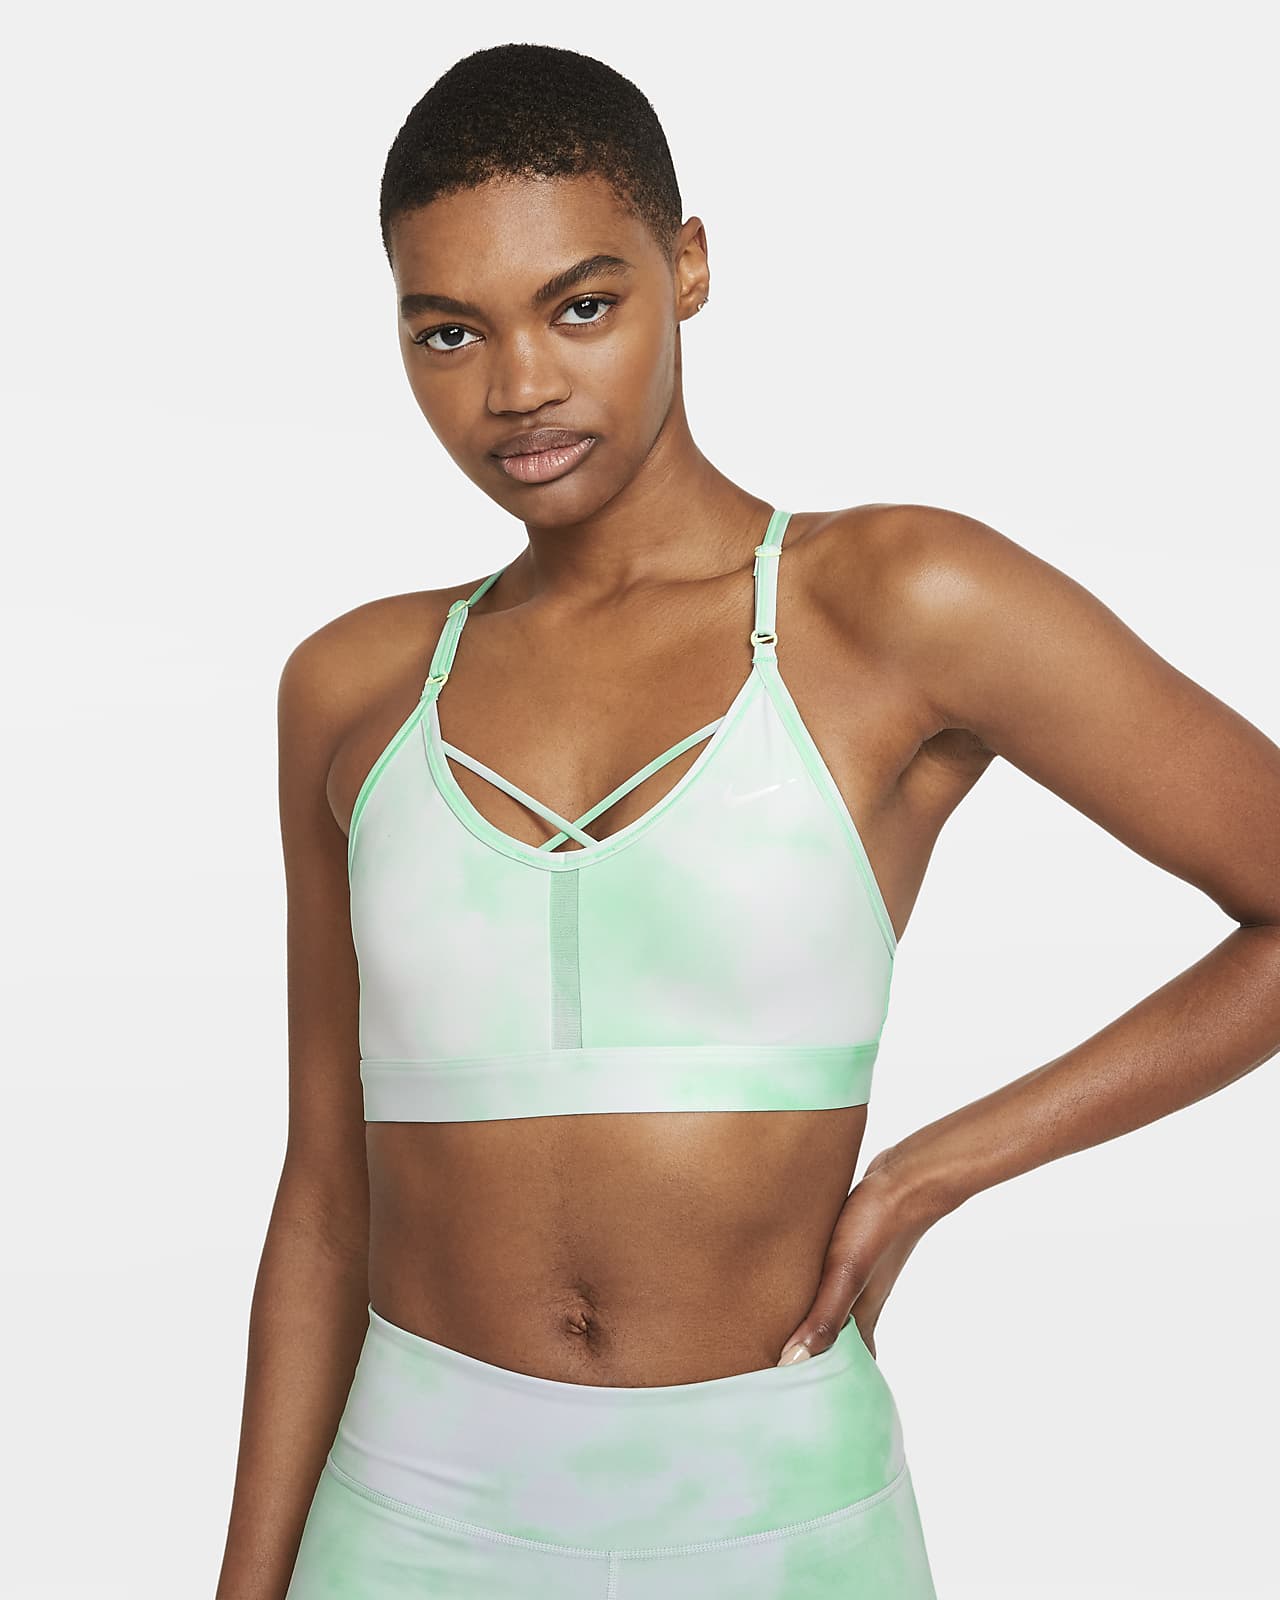 Dean Hearing impaired Insanity Nike Indy Icon Clash Women's Light-Support Padded Strappy Sports Bra. Nike .com